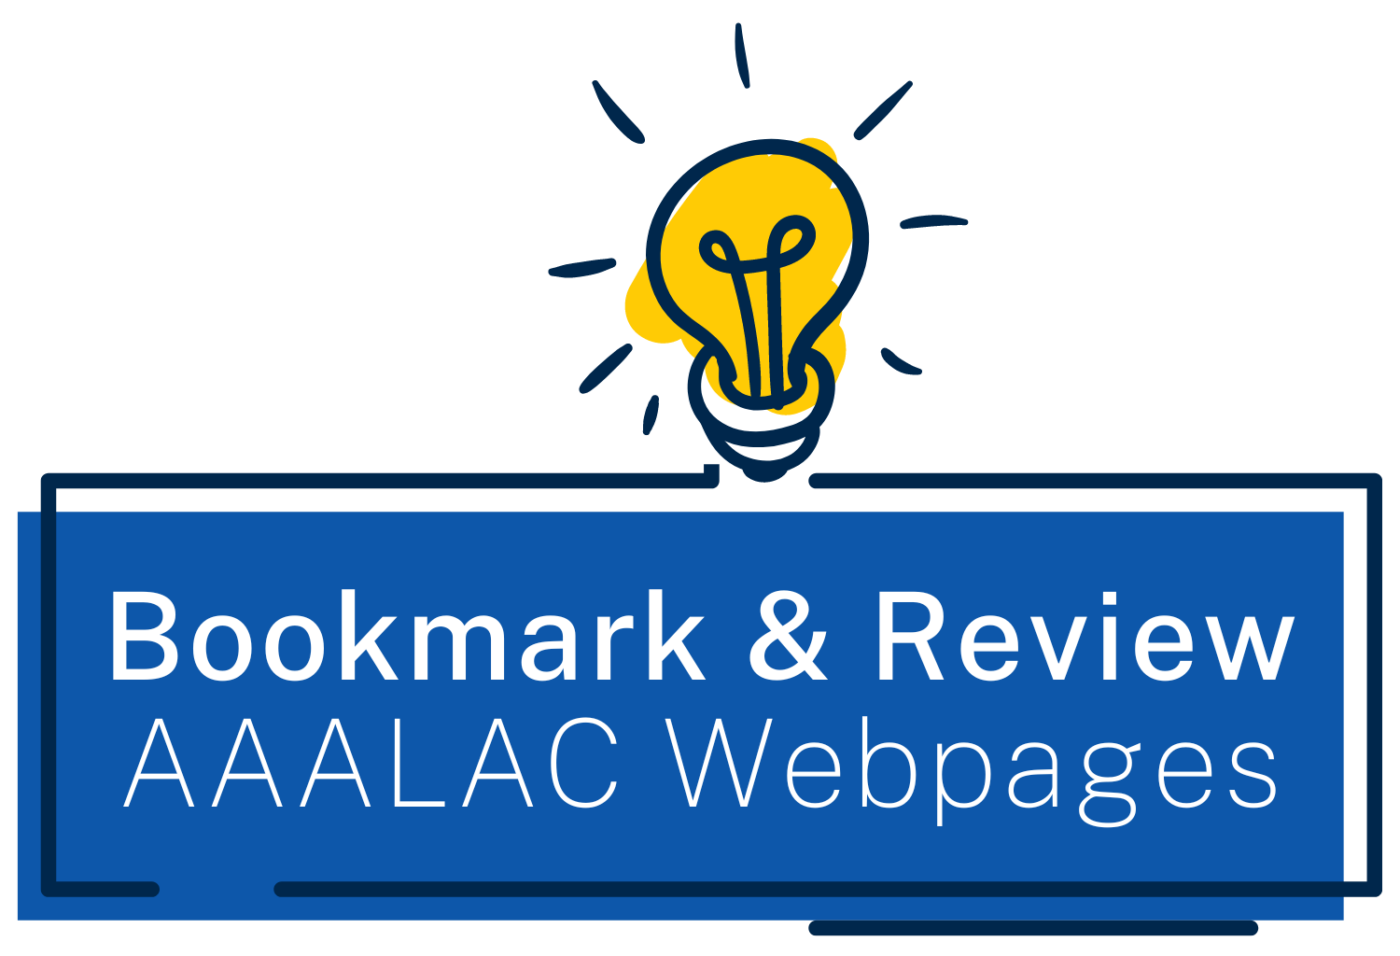 Callout box with lightbulb and text that says "Bookmark & Review AAALAC webpages"